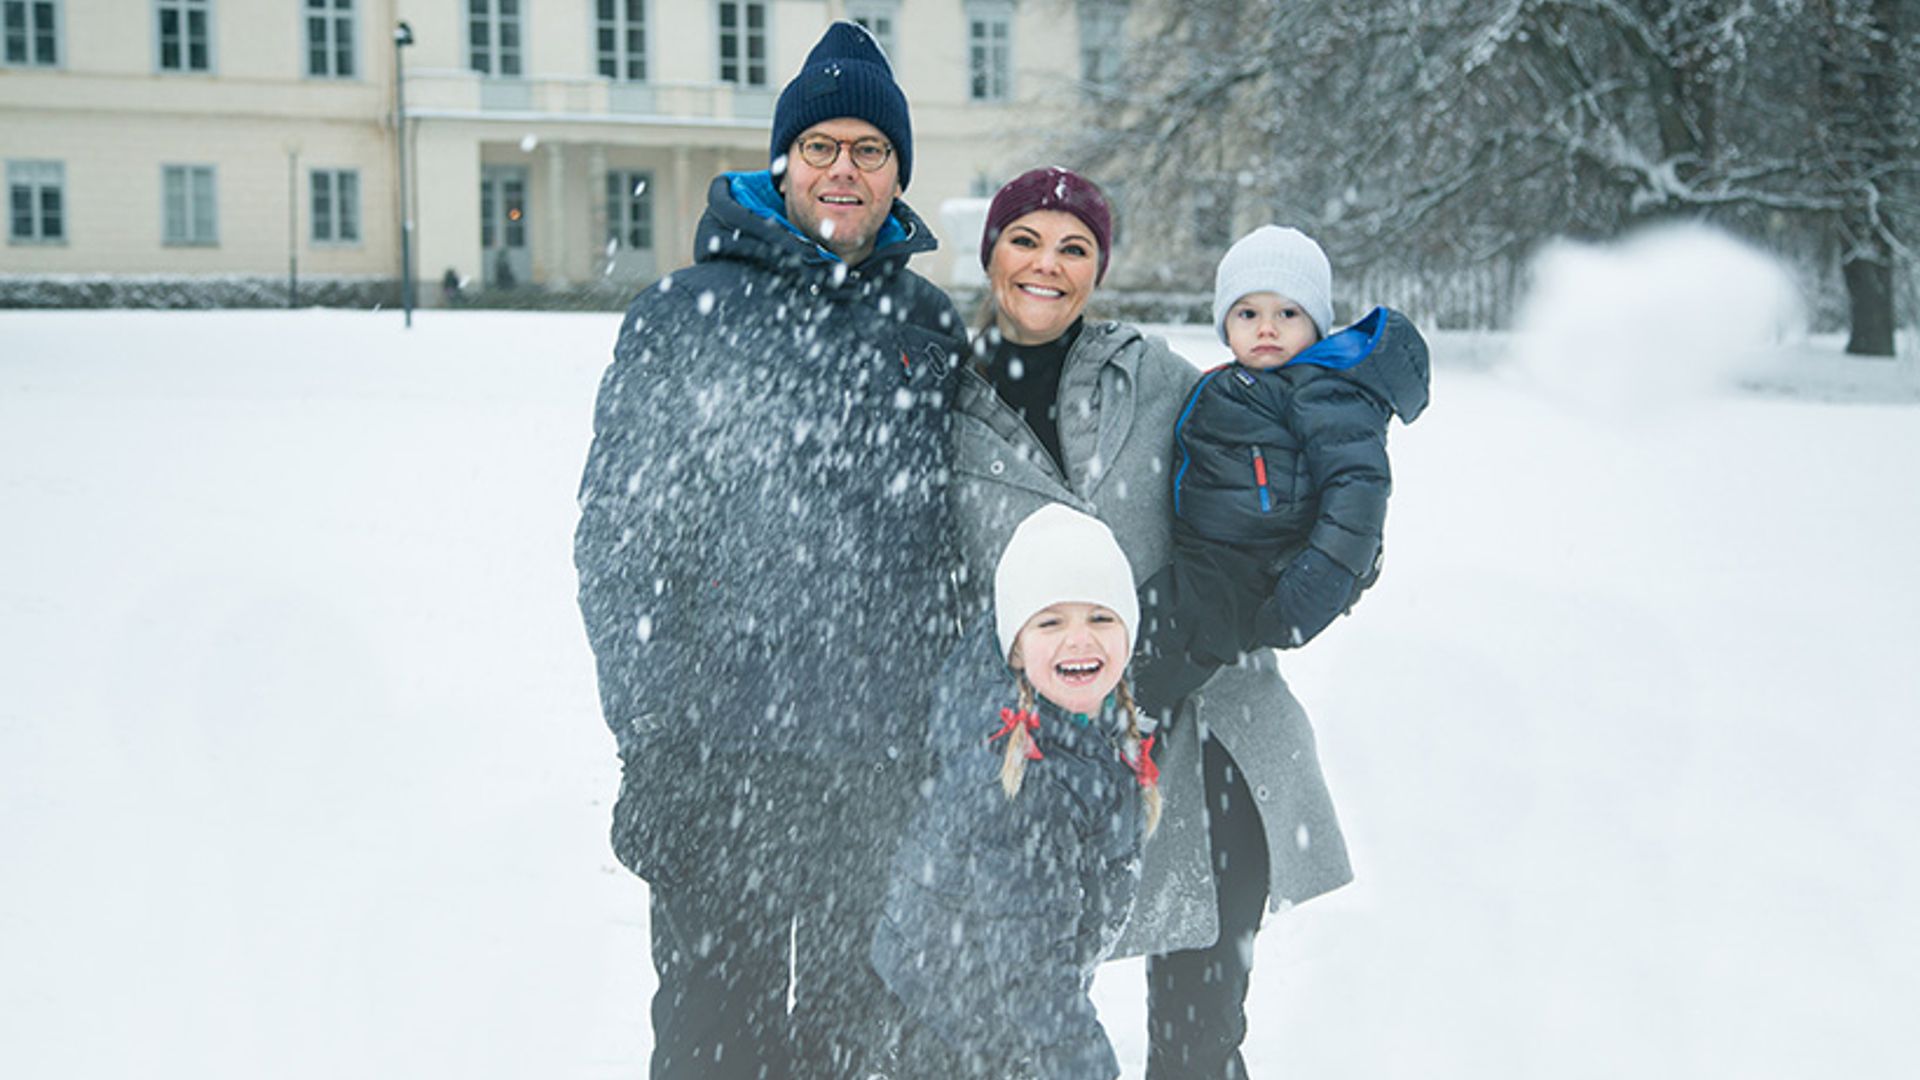 WATCH: Crown Princess Victoria and her family play in the snow at Haga Palace